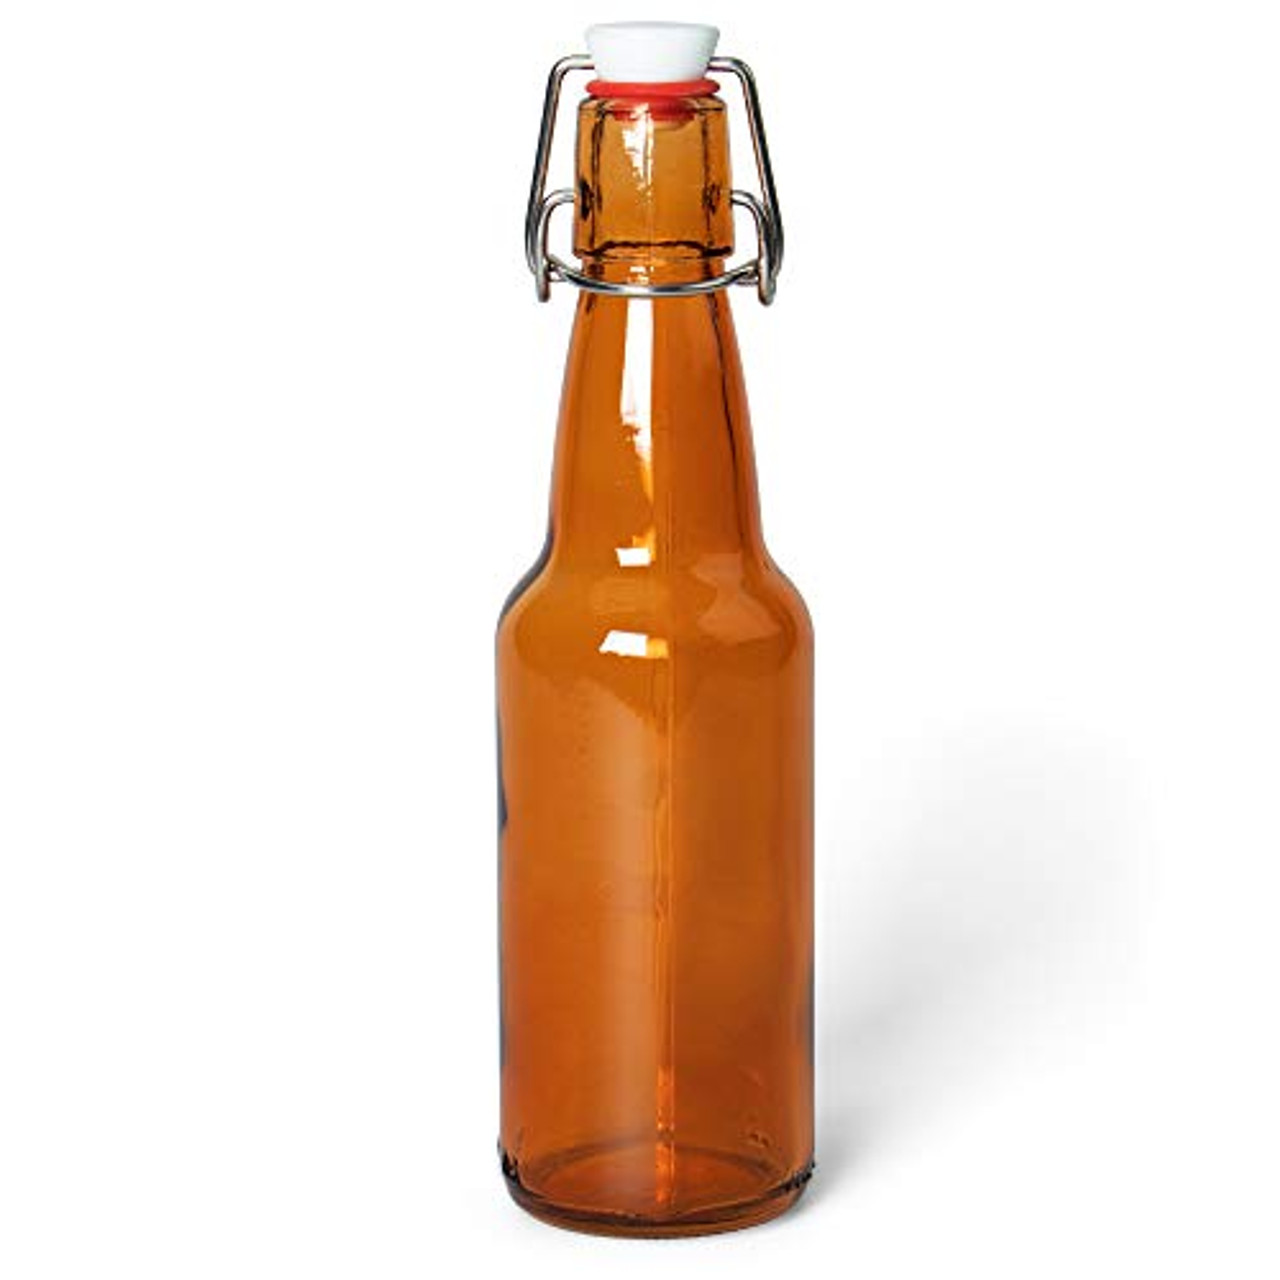 1 Liter Glass Bottle Flip Top Glass Growlers for Beer 64 Oz Growler Set  with Lids Great for Home Brewing, Kombucha & More - China Wine Bottle, Glass  Wine Bottle